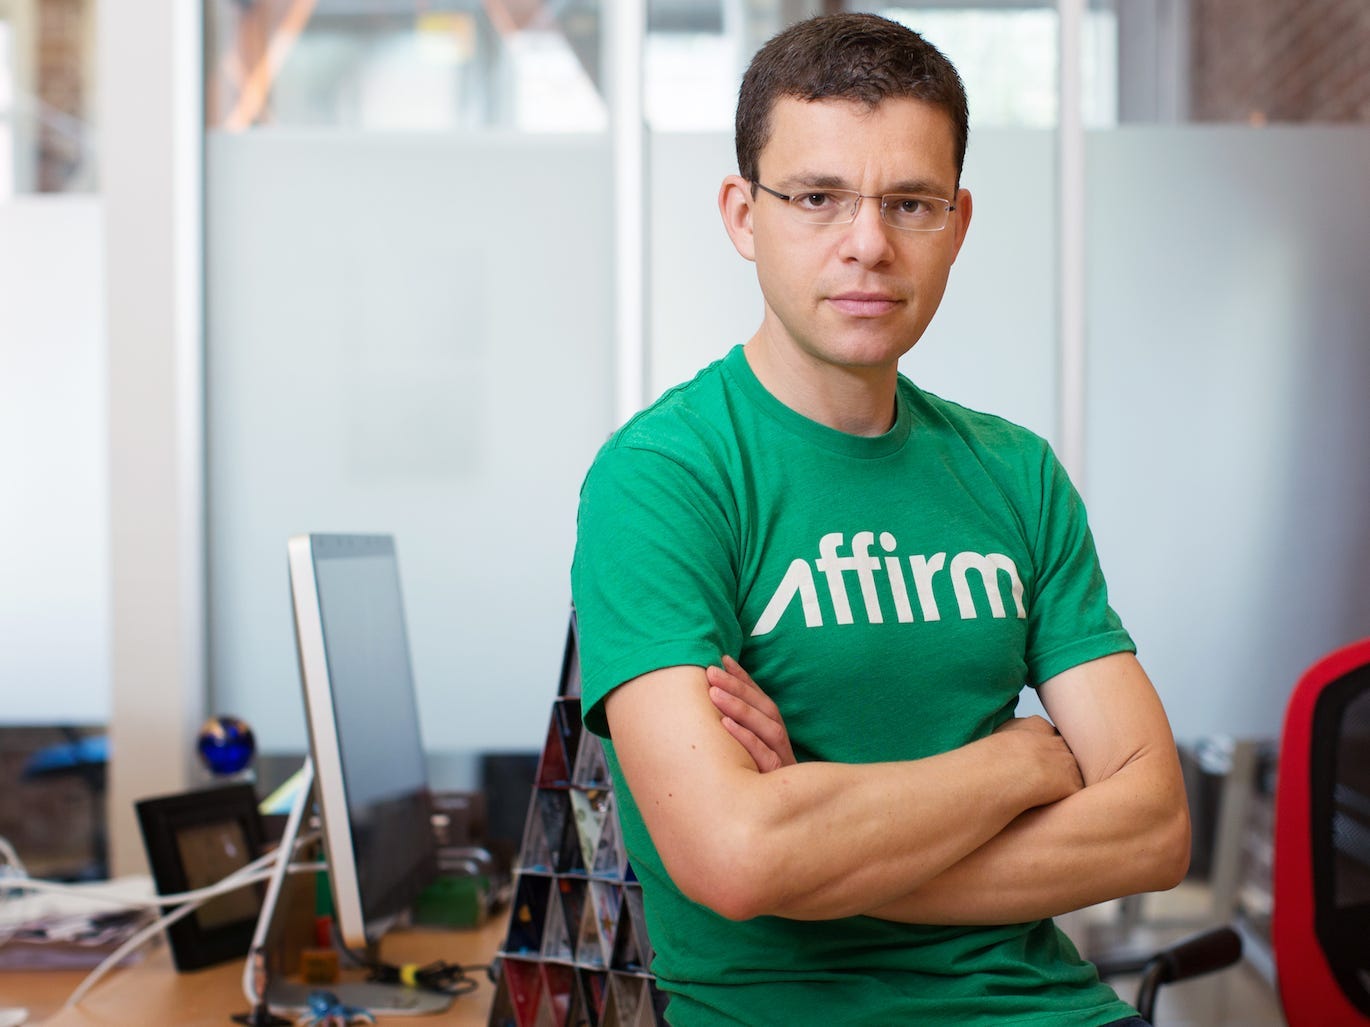 <p>Affirm announced on February 8 it plans to slash 19% of its workforce, after reporting declining sales that missed Wall Street expectations. </p><p>Affirm co-founder and CEO Max Levchin <a href="https://seekingalpha.com/article/4576593-affirm-holdings-inc-afrm-q2-2023-earnings-call-transcript" rel="noopener">said in a call with investors</a> that the technology company "has taken appropriate action" in many areas of the business to navigate economic headwinds, including creating a "smaller, therefore, nimbler team."</p><p>"I believe this is the right decision as we have hired a larger team that we can sustainably support in today's economic reality, but I am truly sorry to see many of our talented colleagues depart and we'll be forever grateful for their contributions to our mission," he said. </p>